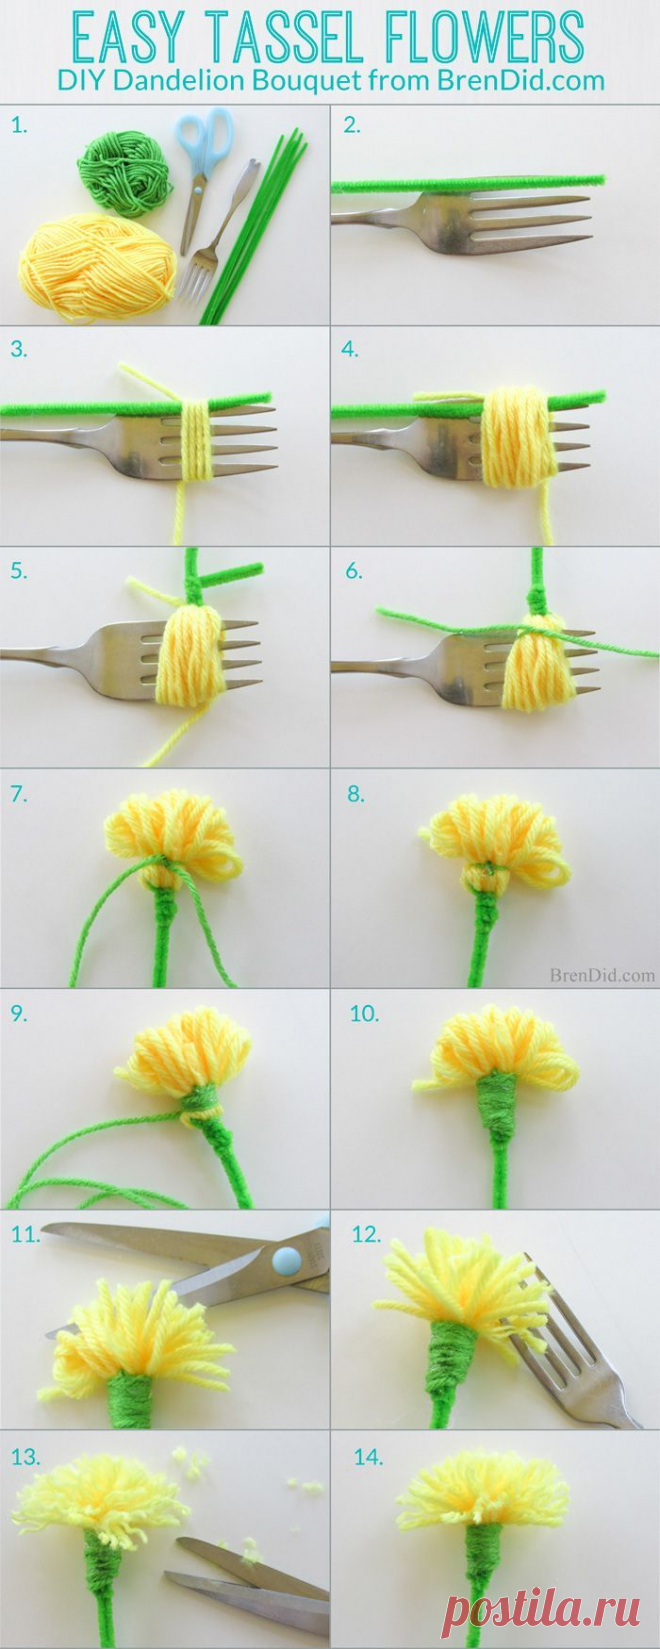 How to make tassel flowers - Make an easy DIY dandelion bouquet with yarn and pipe cleaners to delight someone you love. Perfect for weddings, parties and Mother's Day. #DIY #tassels